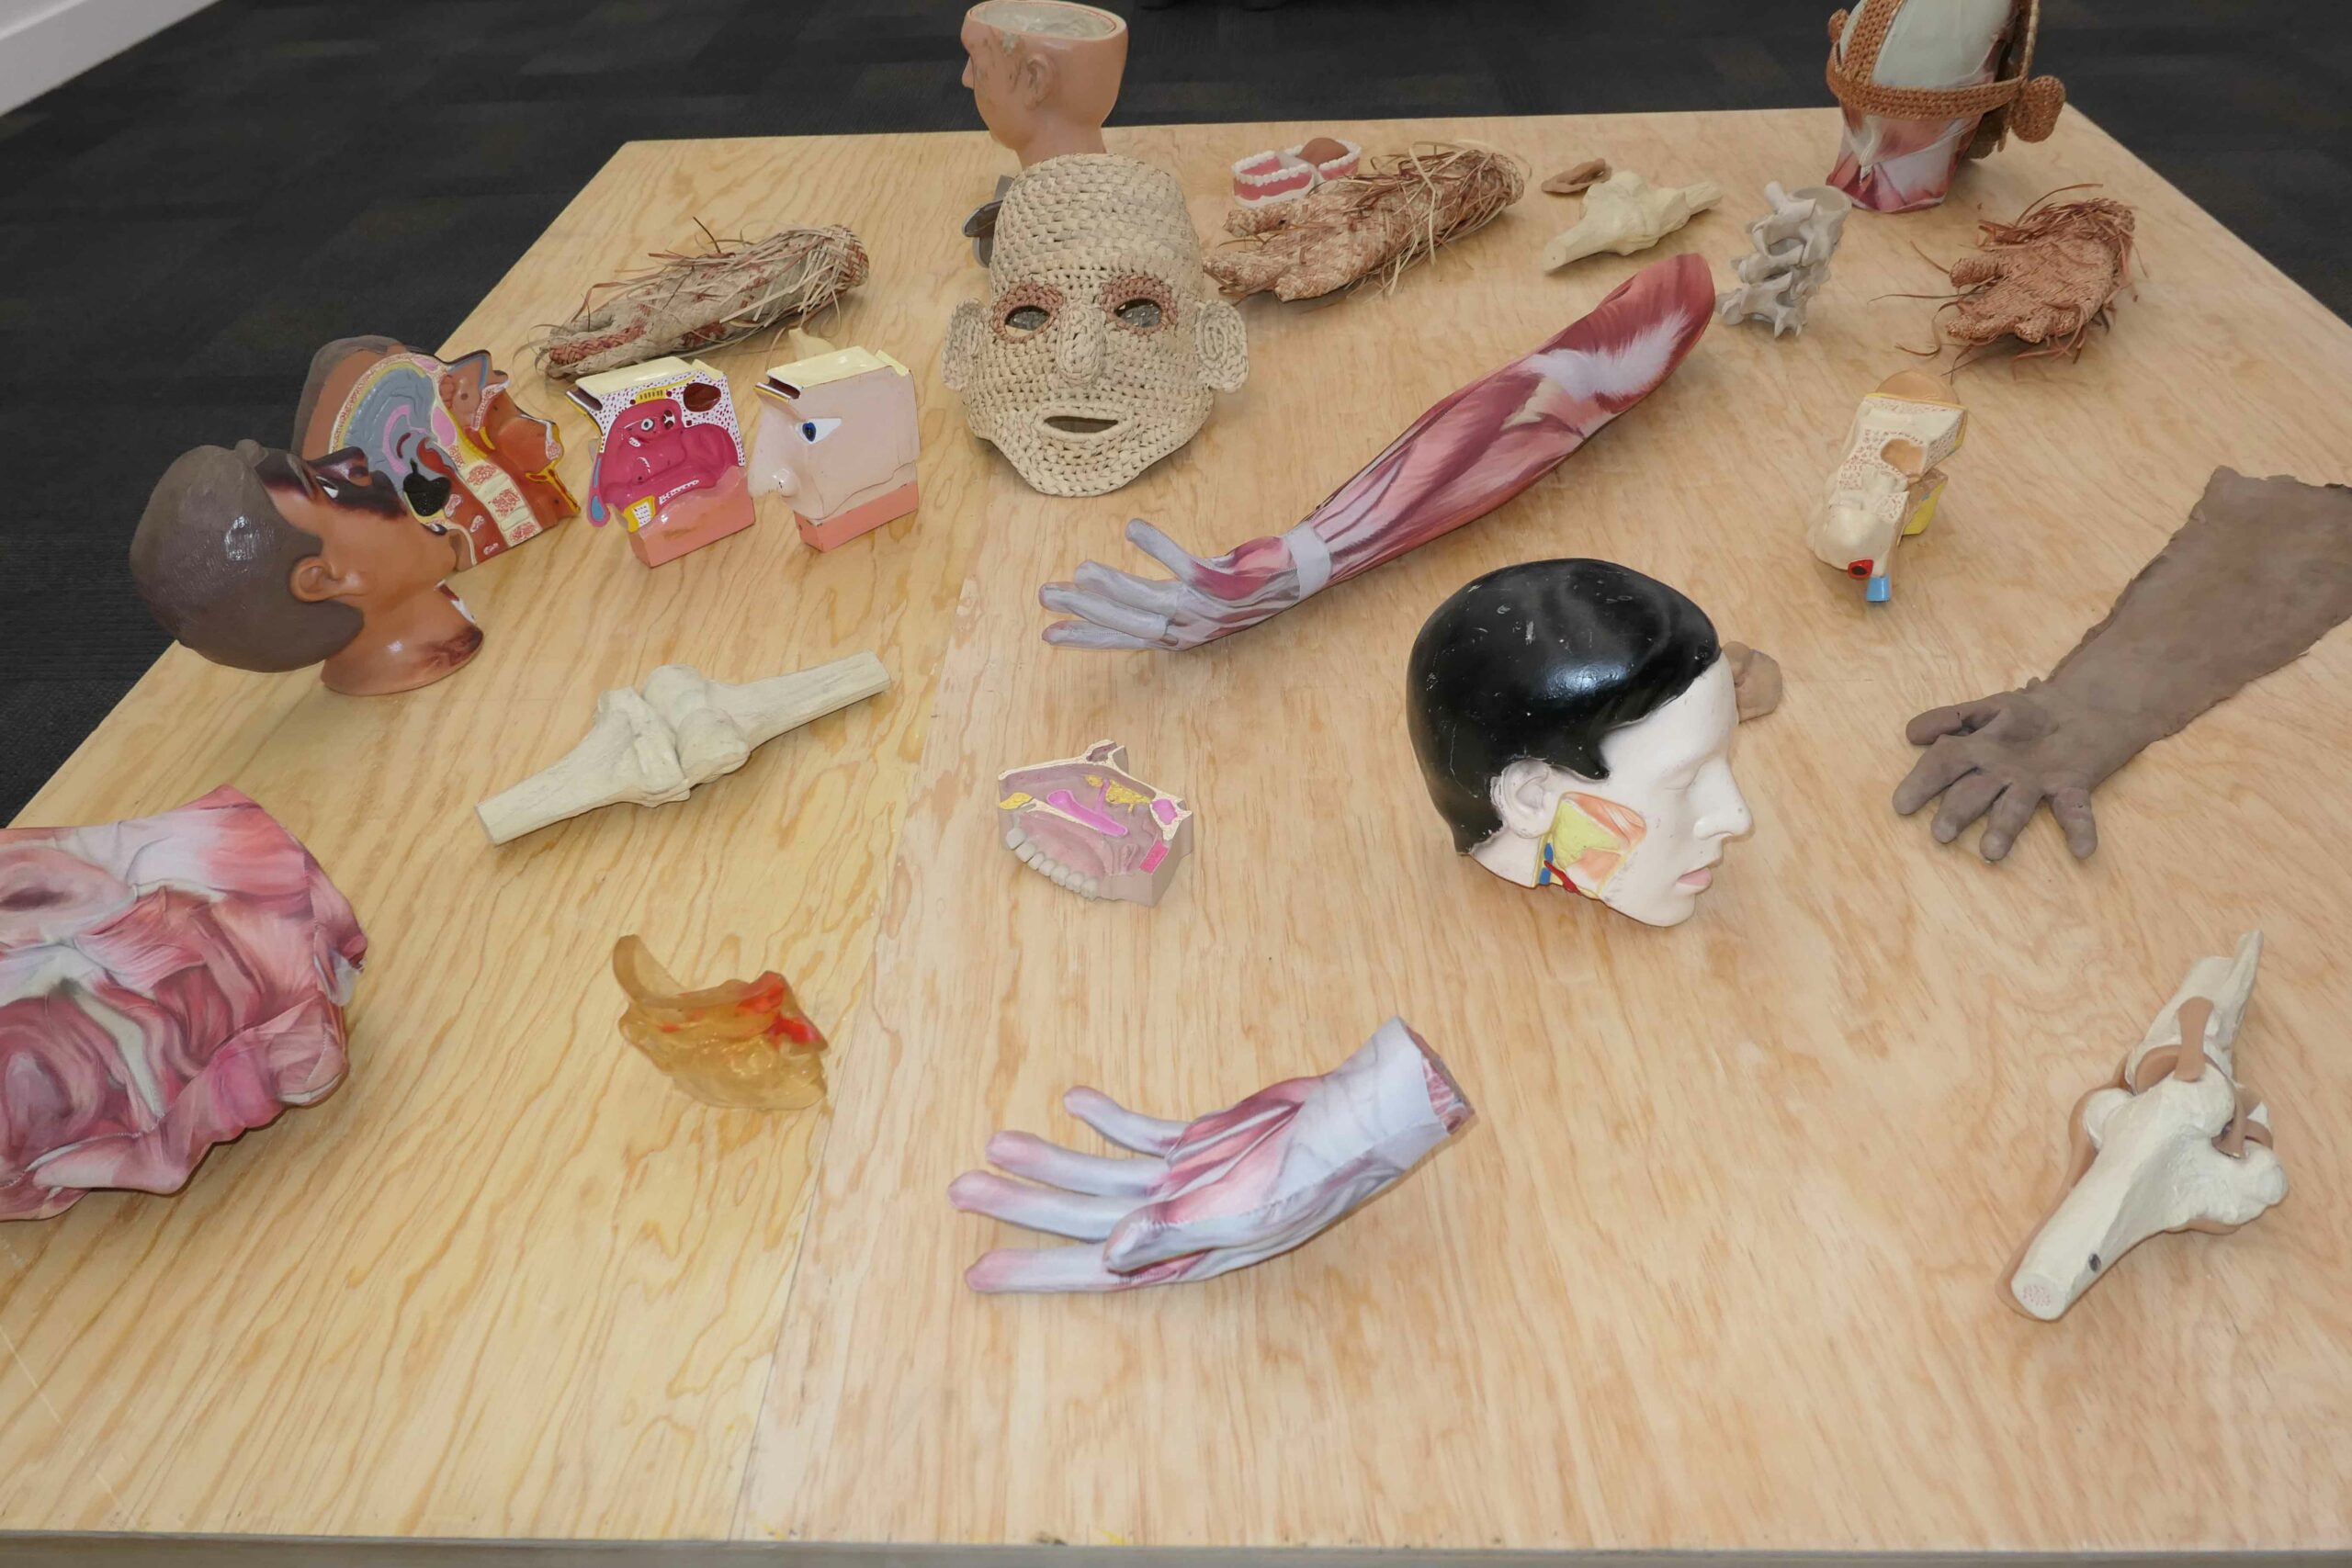 approximately 22 small sculptures rest atop a wooden tabletop. Many of the sculptures are medical models of body parts: hands, arms, ear, throat, and nose models, as well as bones and joints.